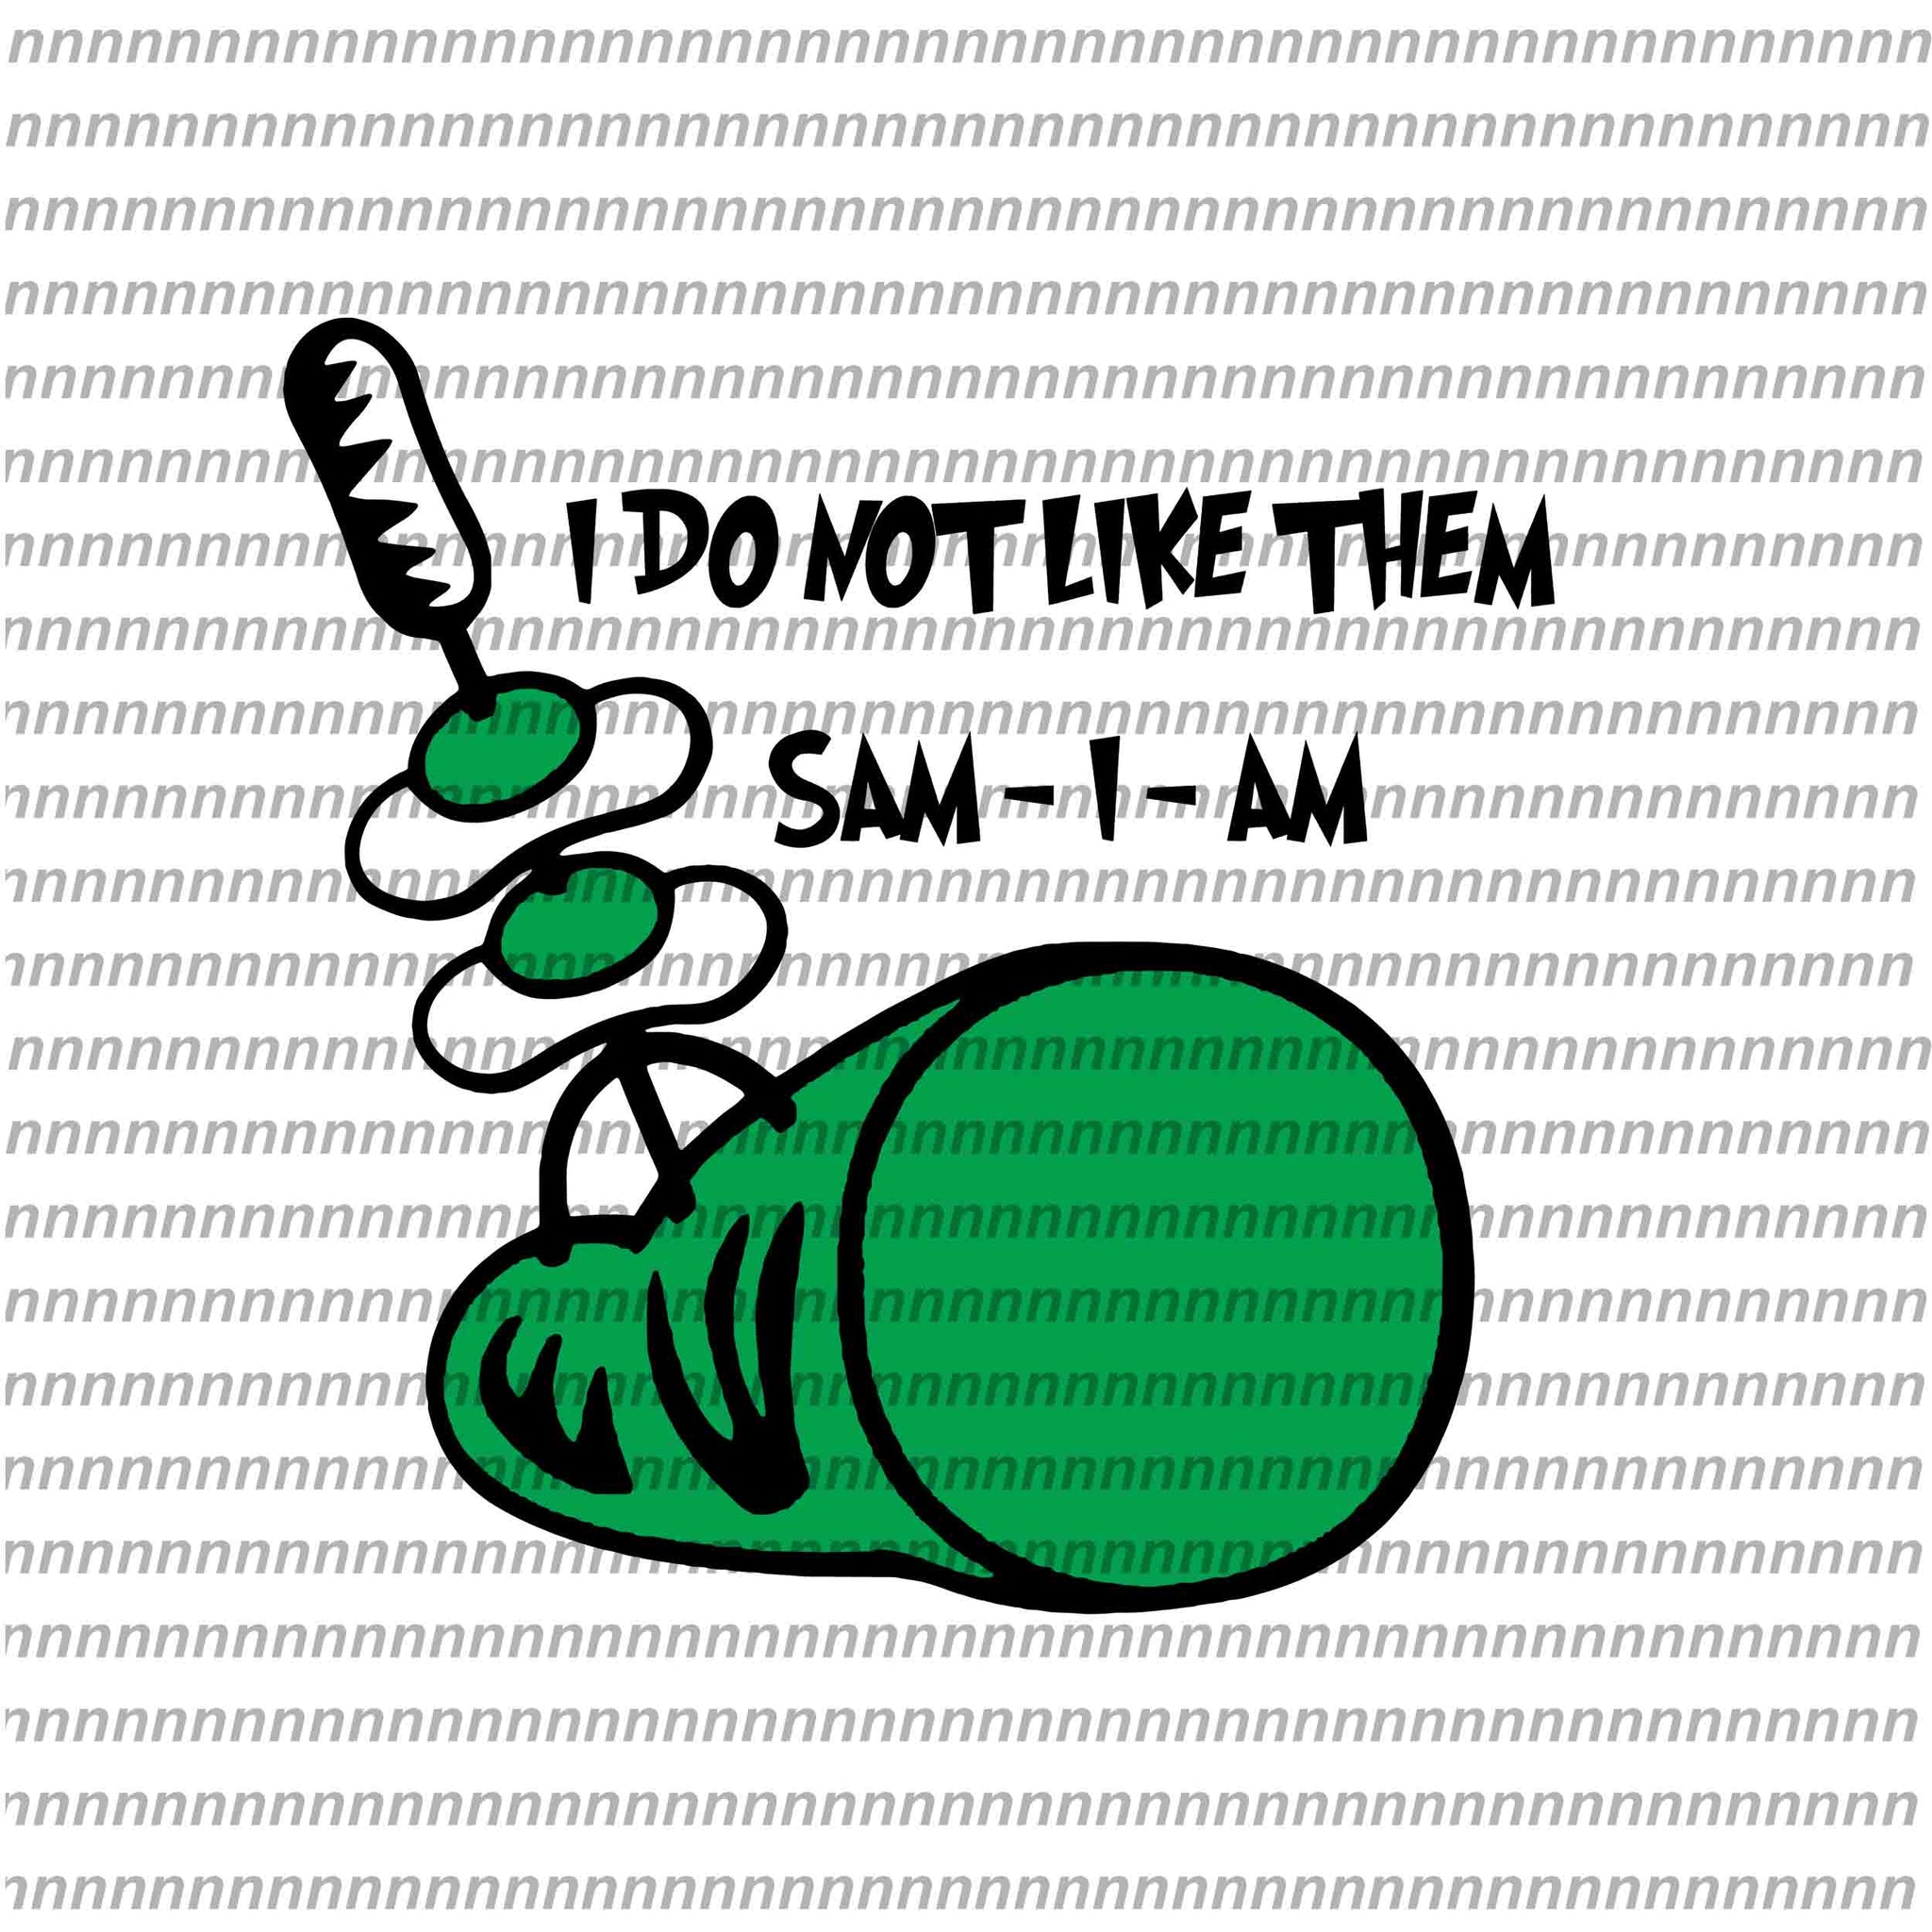 I do not like them sam i am, dr seuss svg, dr seuss vector, dr seuss quote, dr seuss design, Cat in the hat svg, thing 1 thing 2 thing 3, svg, png, dxf, eps file